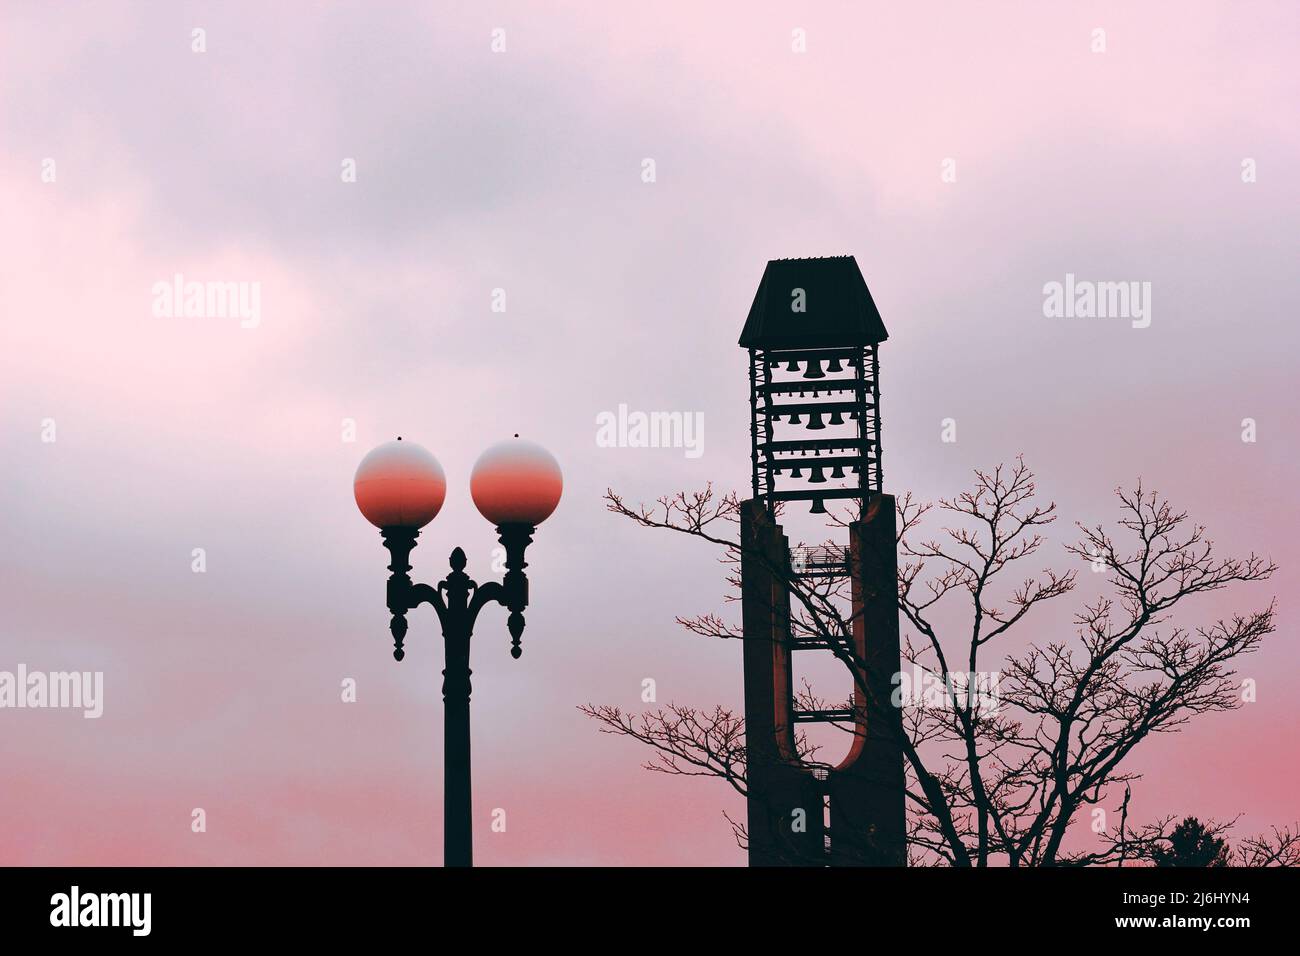 South Quad Carillon Bell Tower in Urbana, Illinois, USA standing against the pink sky. Stock Photo